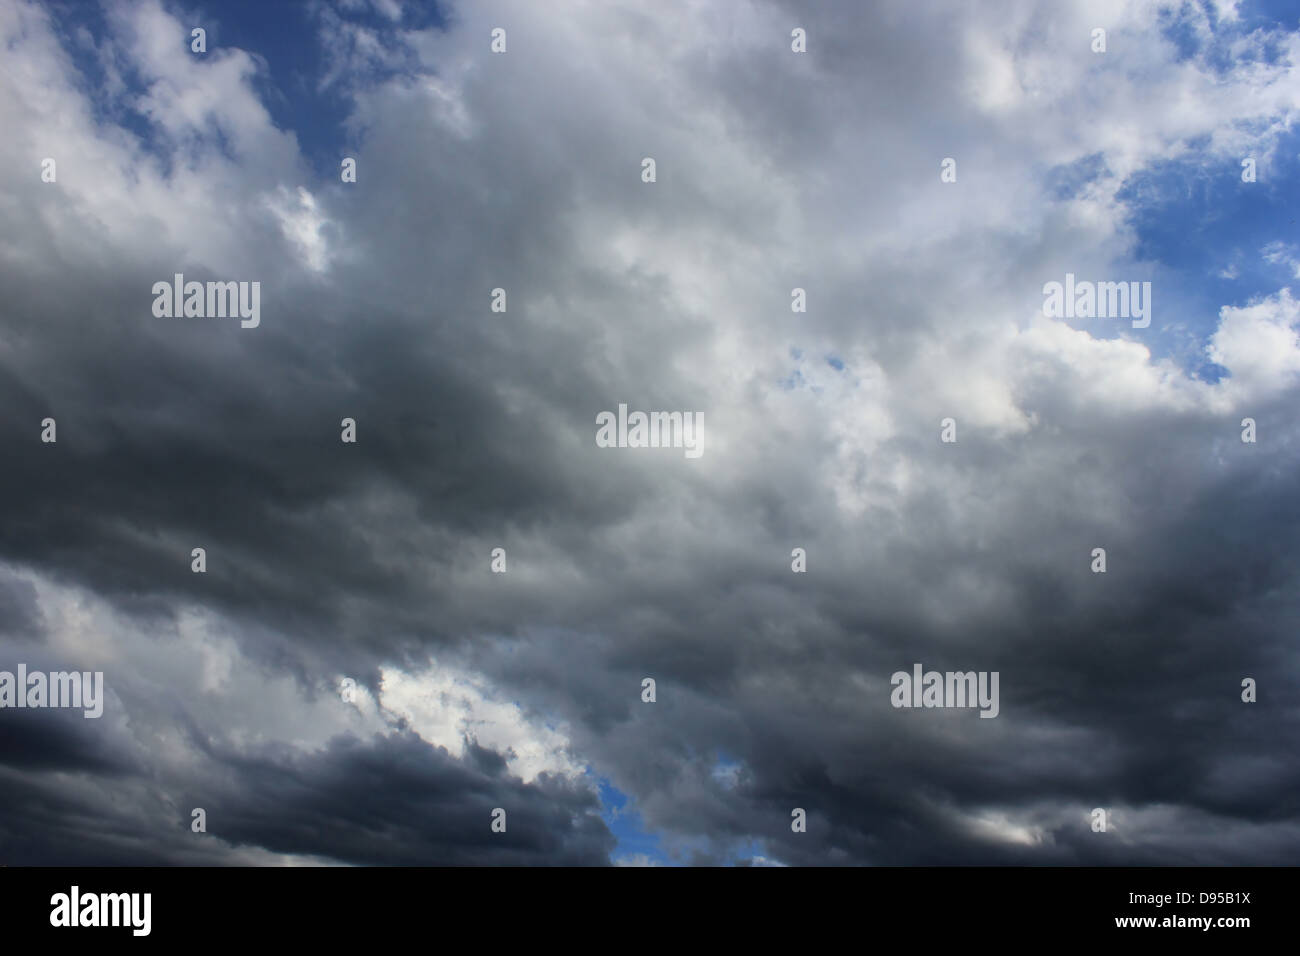 Blue sky filled with dramatic dark-light clouds Stock Photo